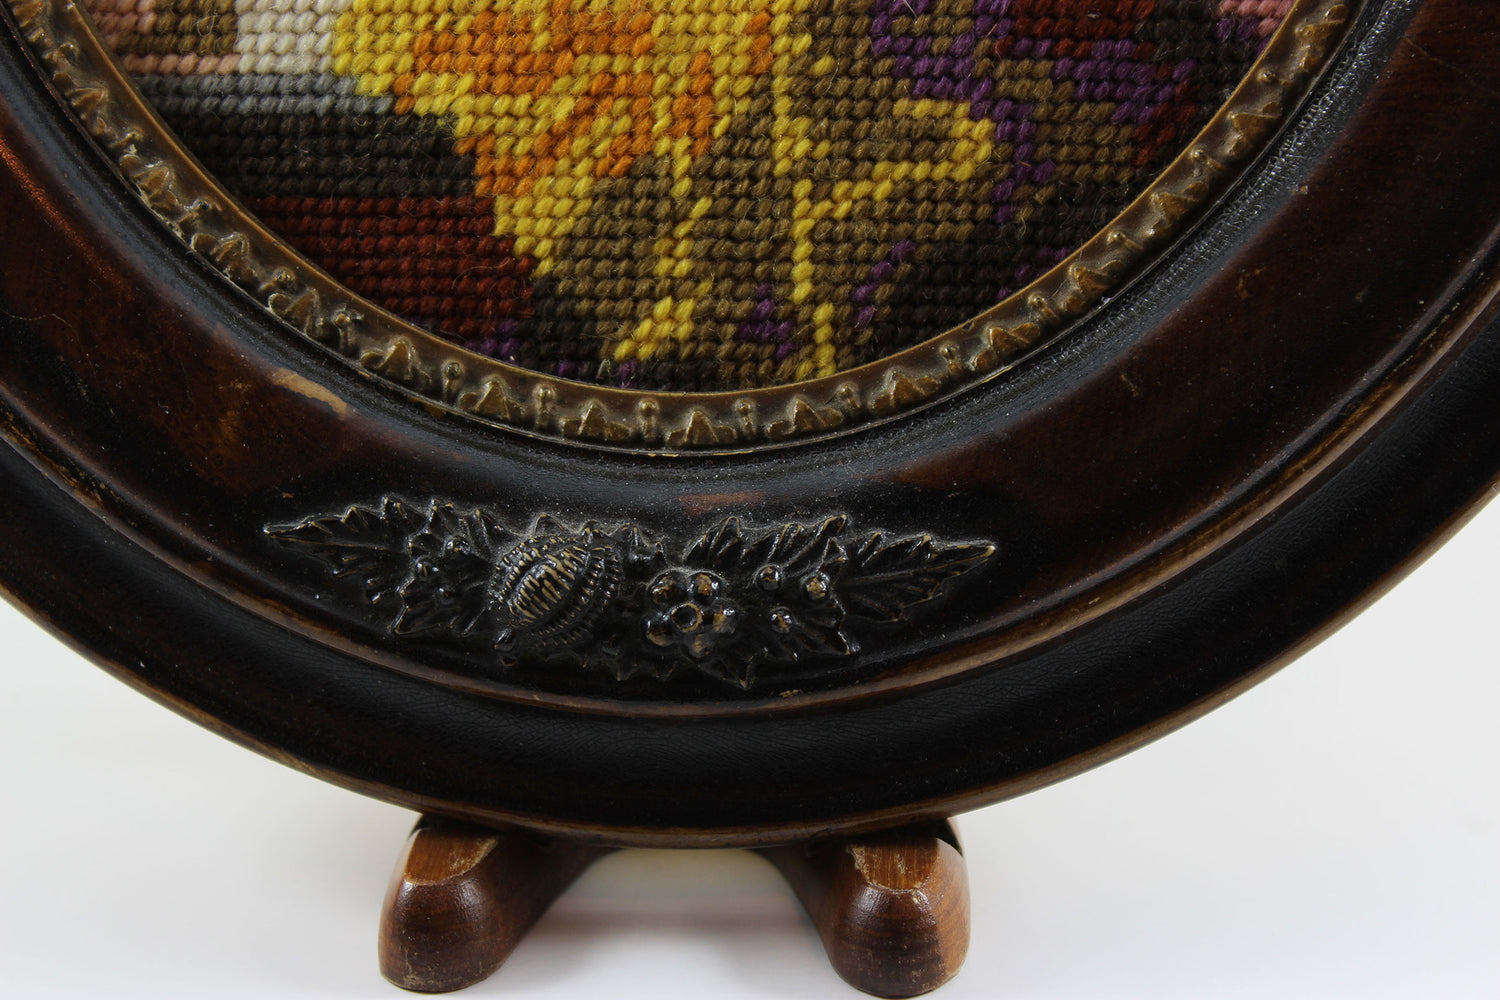 Antique Oval Frame with Needlepoint Portrait